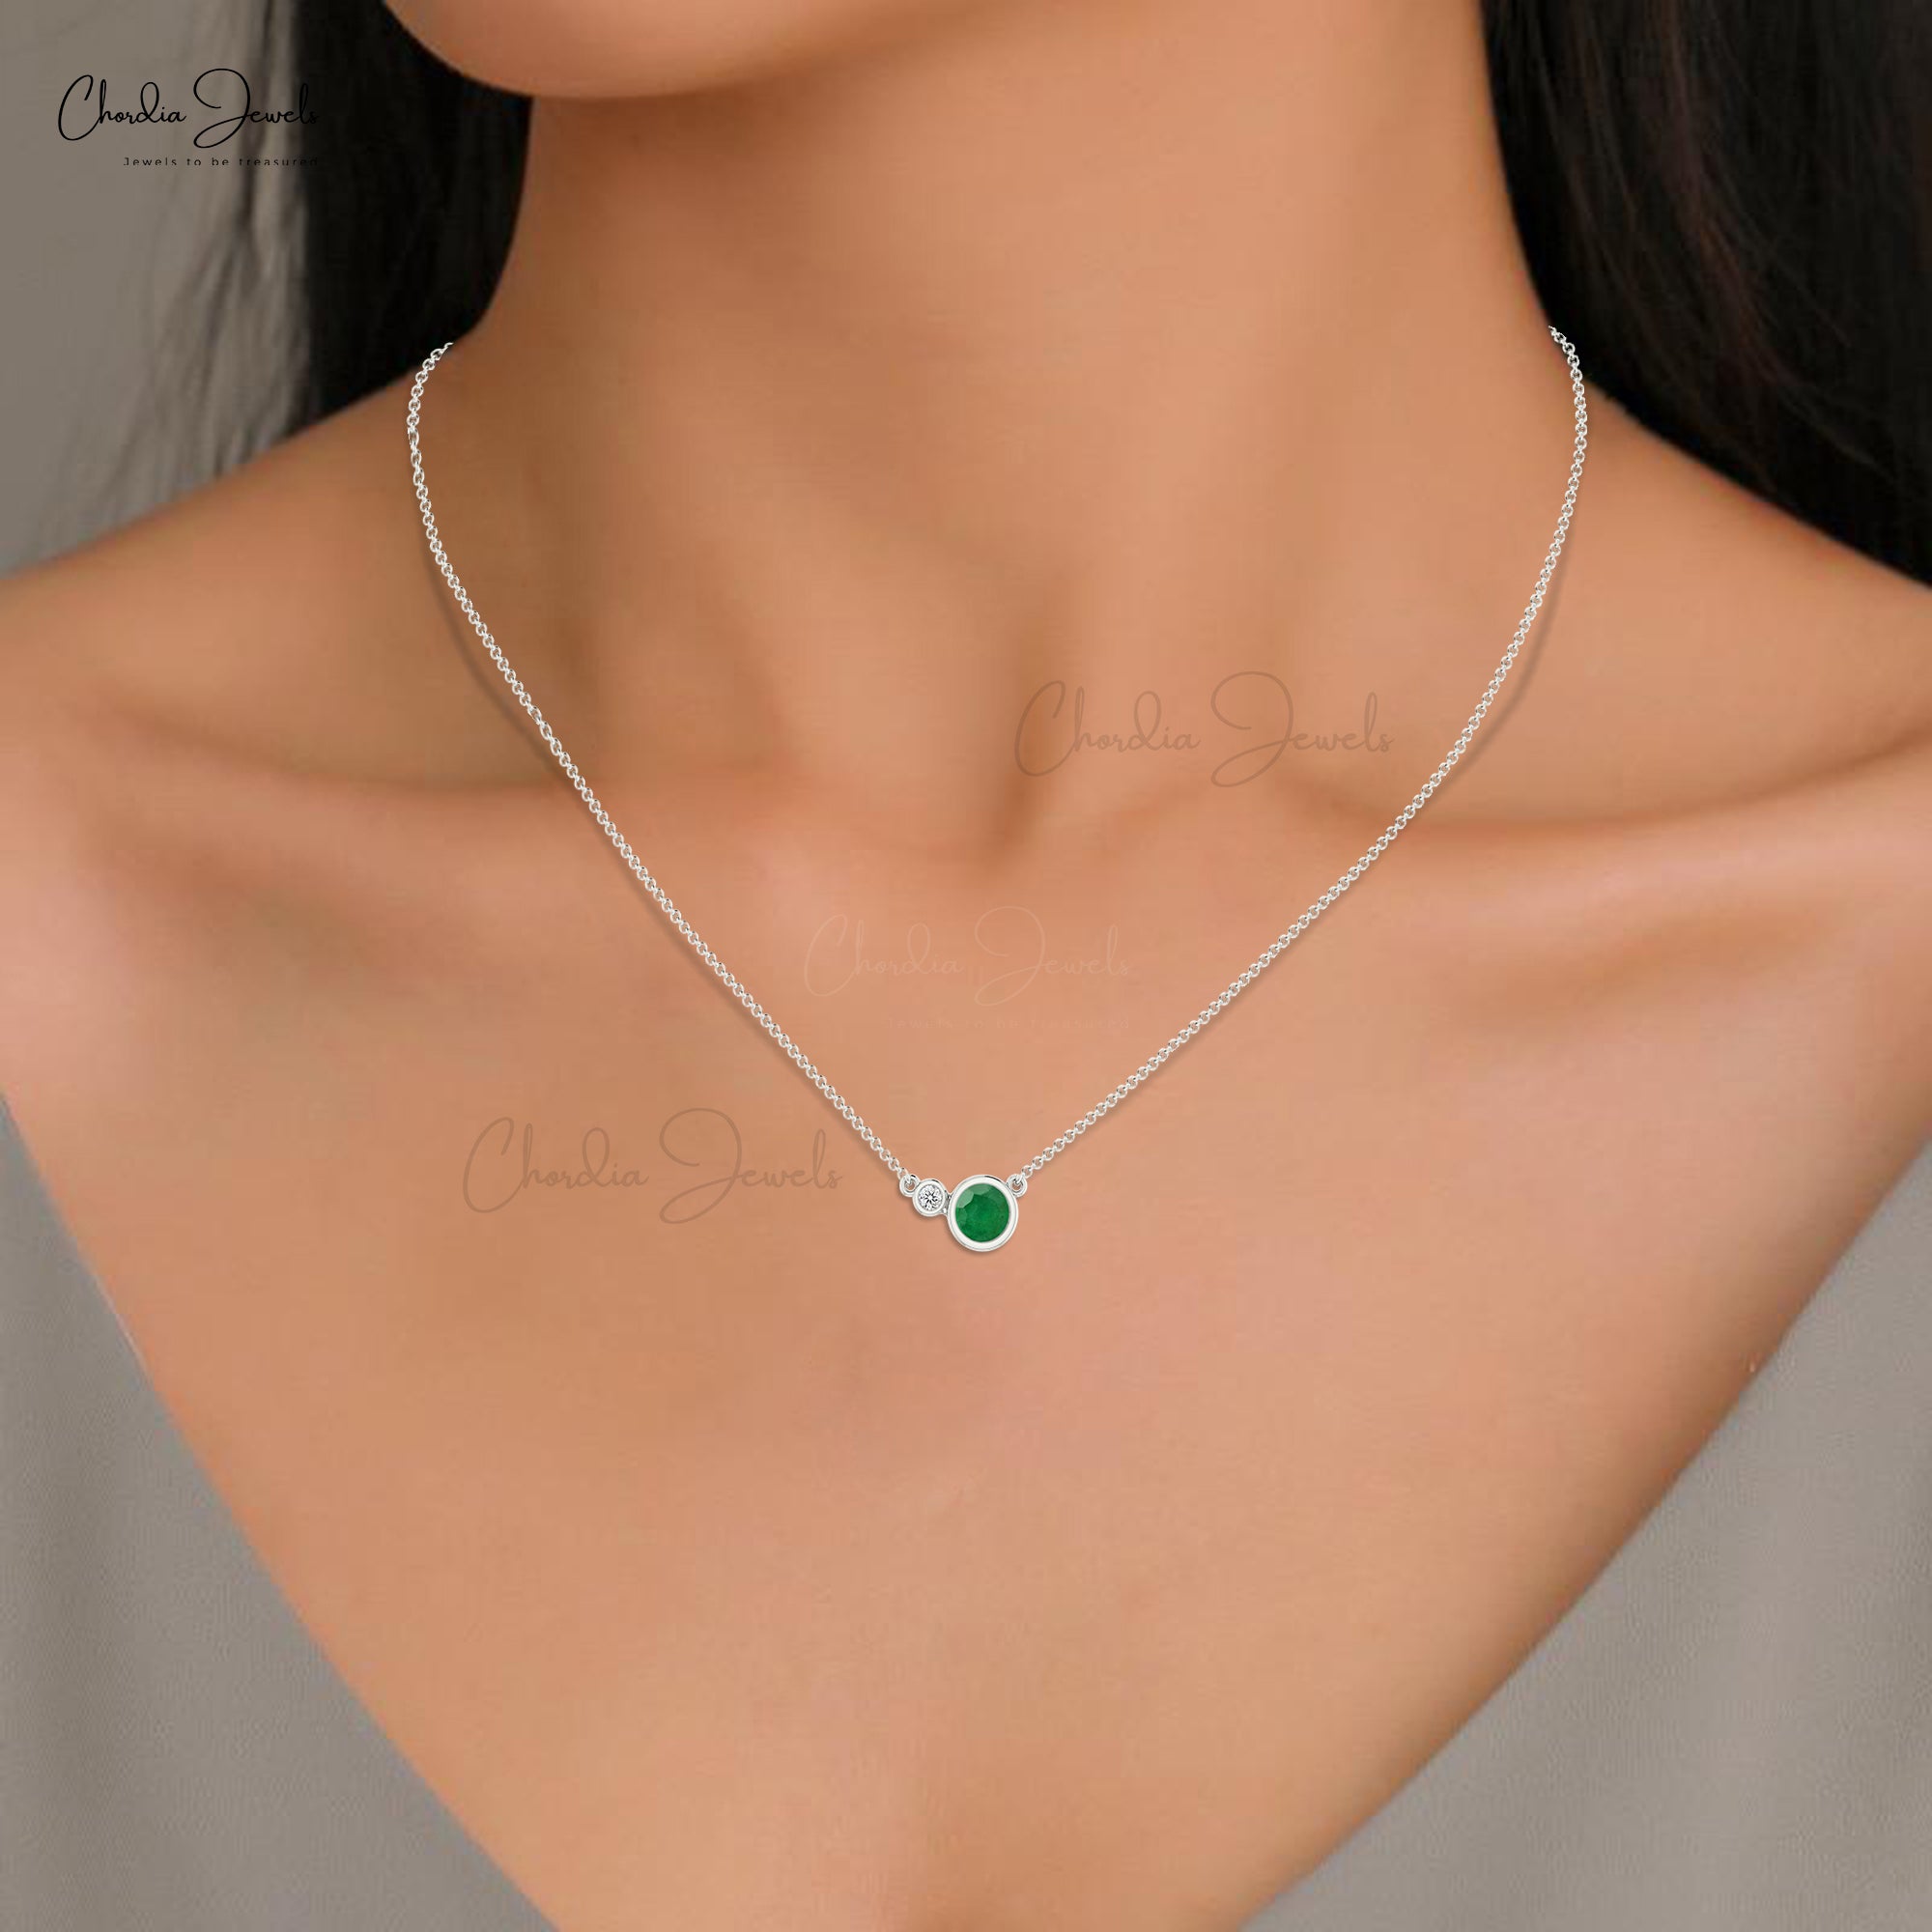 AZLEE - The Small Emerald Bead Necklace paired with our Gold Aurum Nugget  and the Zodiac Large Coin Necklace. Available on AzleeJewelry.com  #AzleeJewelry #CoinNecklace | Facebook